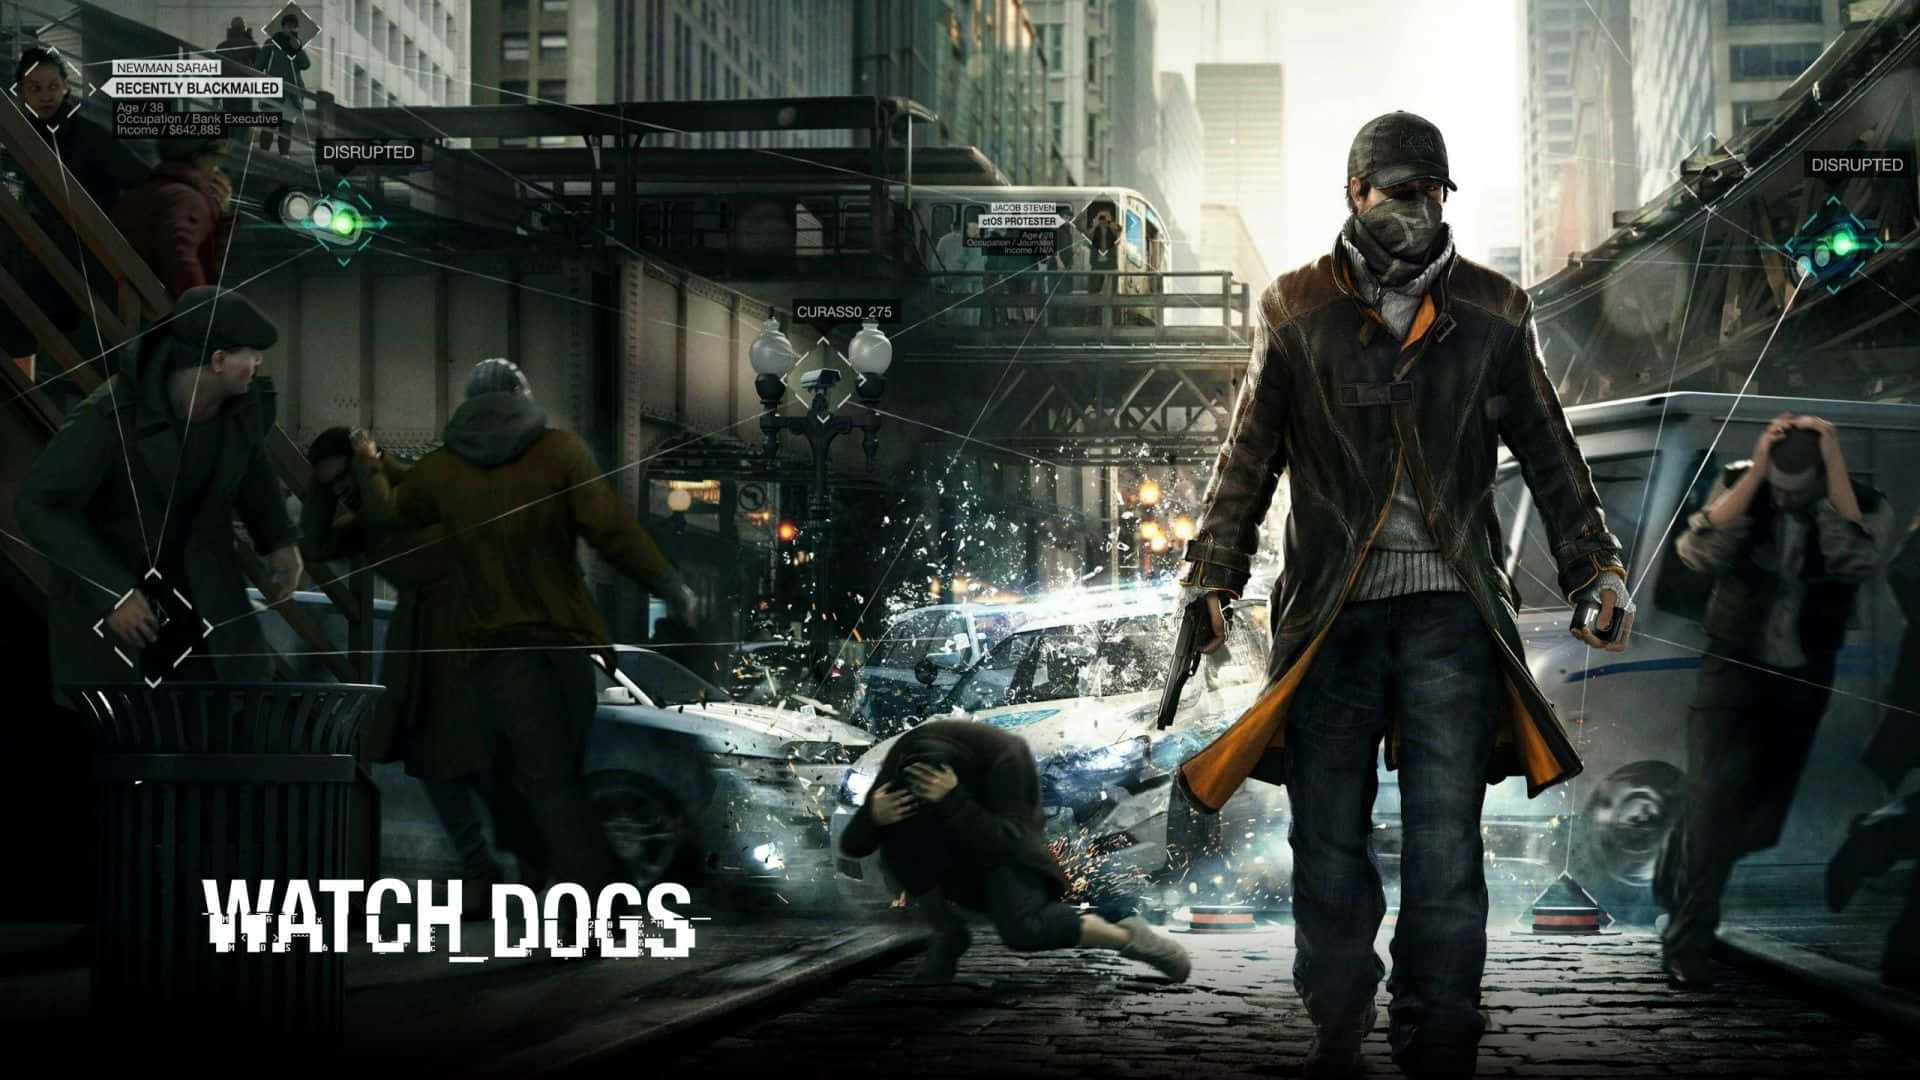 Annihilate the opposition in "Sleeping Dogs"